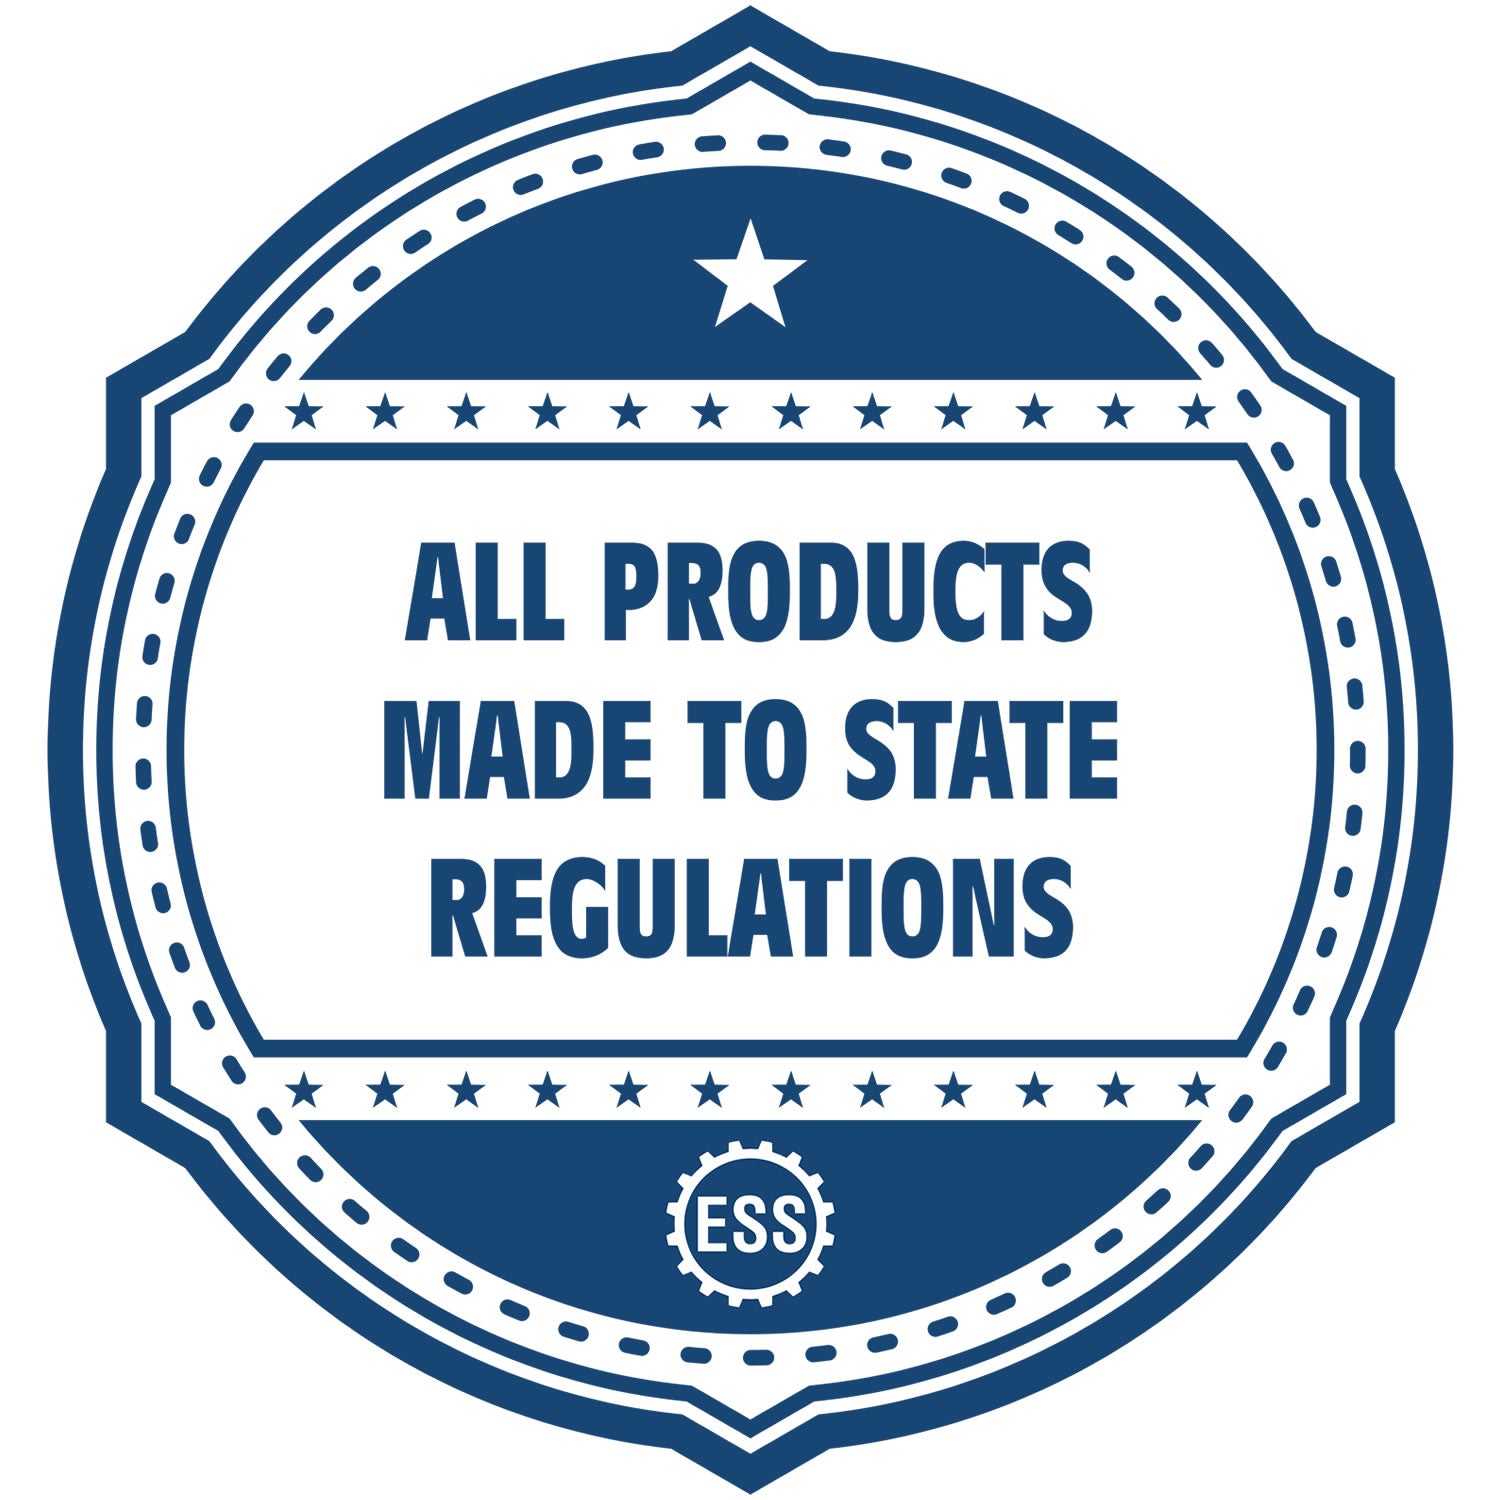 An icon or badge element for the Long Reach Tennessee Land Surveyor Seal showing that this product is made in compliance with state regulations.